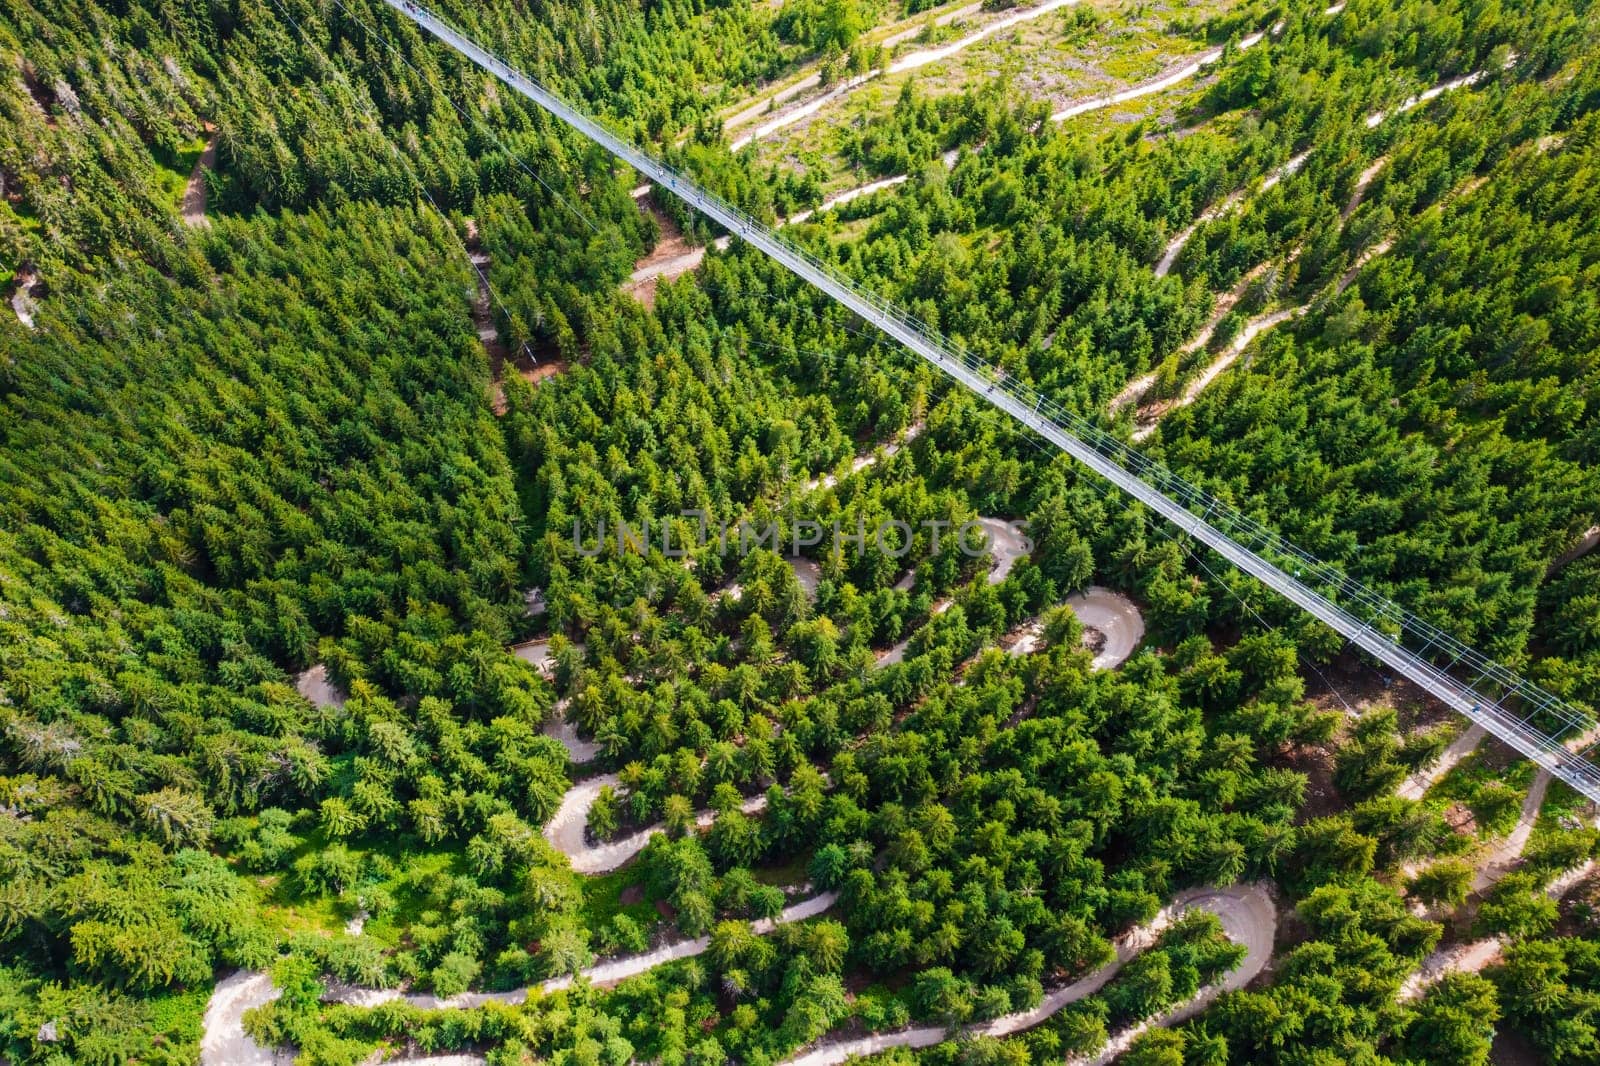 Top view of a Sky Bridge 721 in Dolni Morava in Czech Republic. The longest suspension footbridge in the world in the forest between hills.